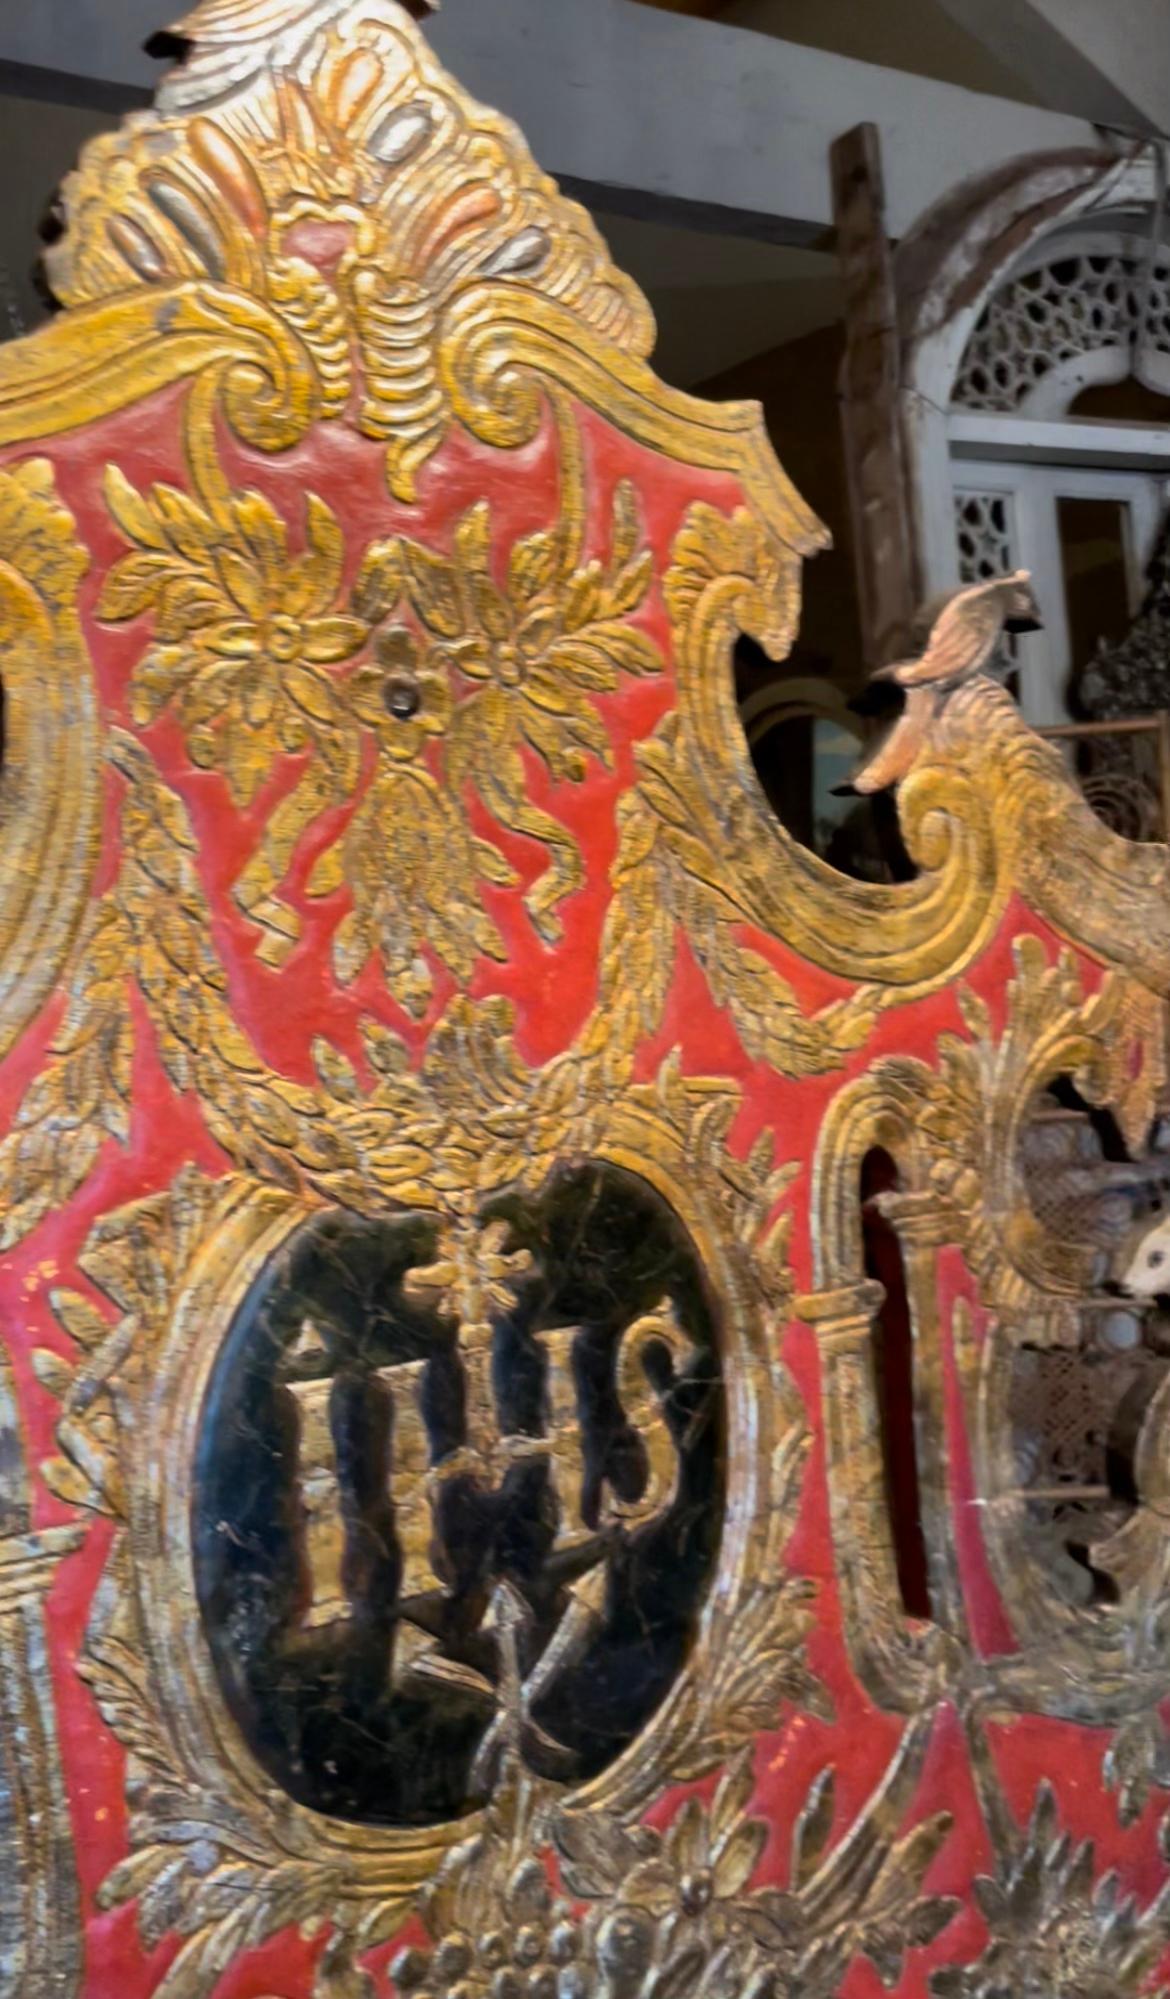 This incredibly unique antique Italian bed is lacquered in a back ground of red with carved gold leaf details in intricate patterns and, most notably, adorned with carvings that are hand painted depictions of animals.

The 18th century carved bed